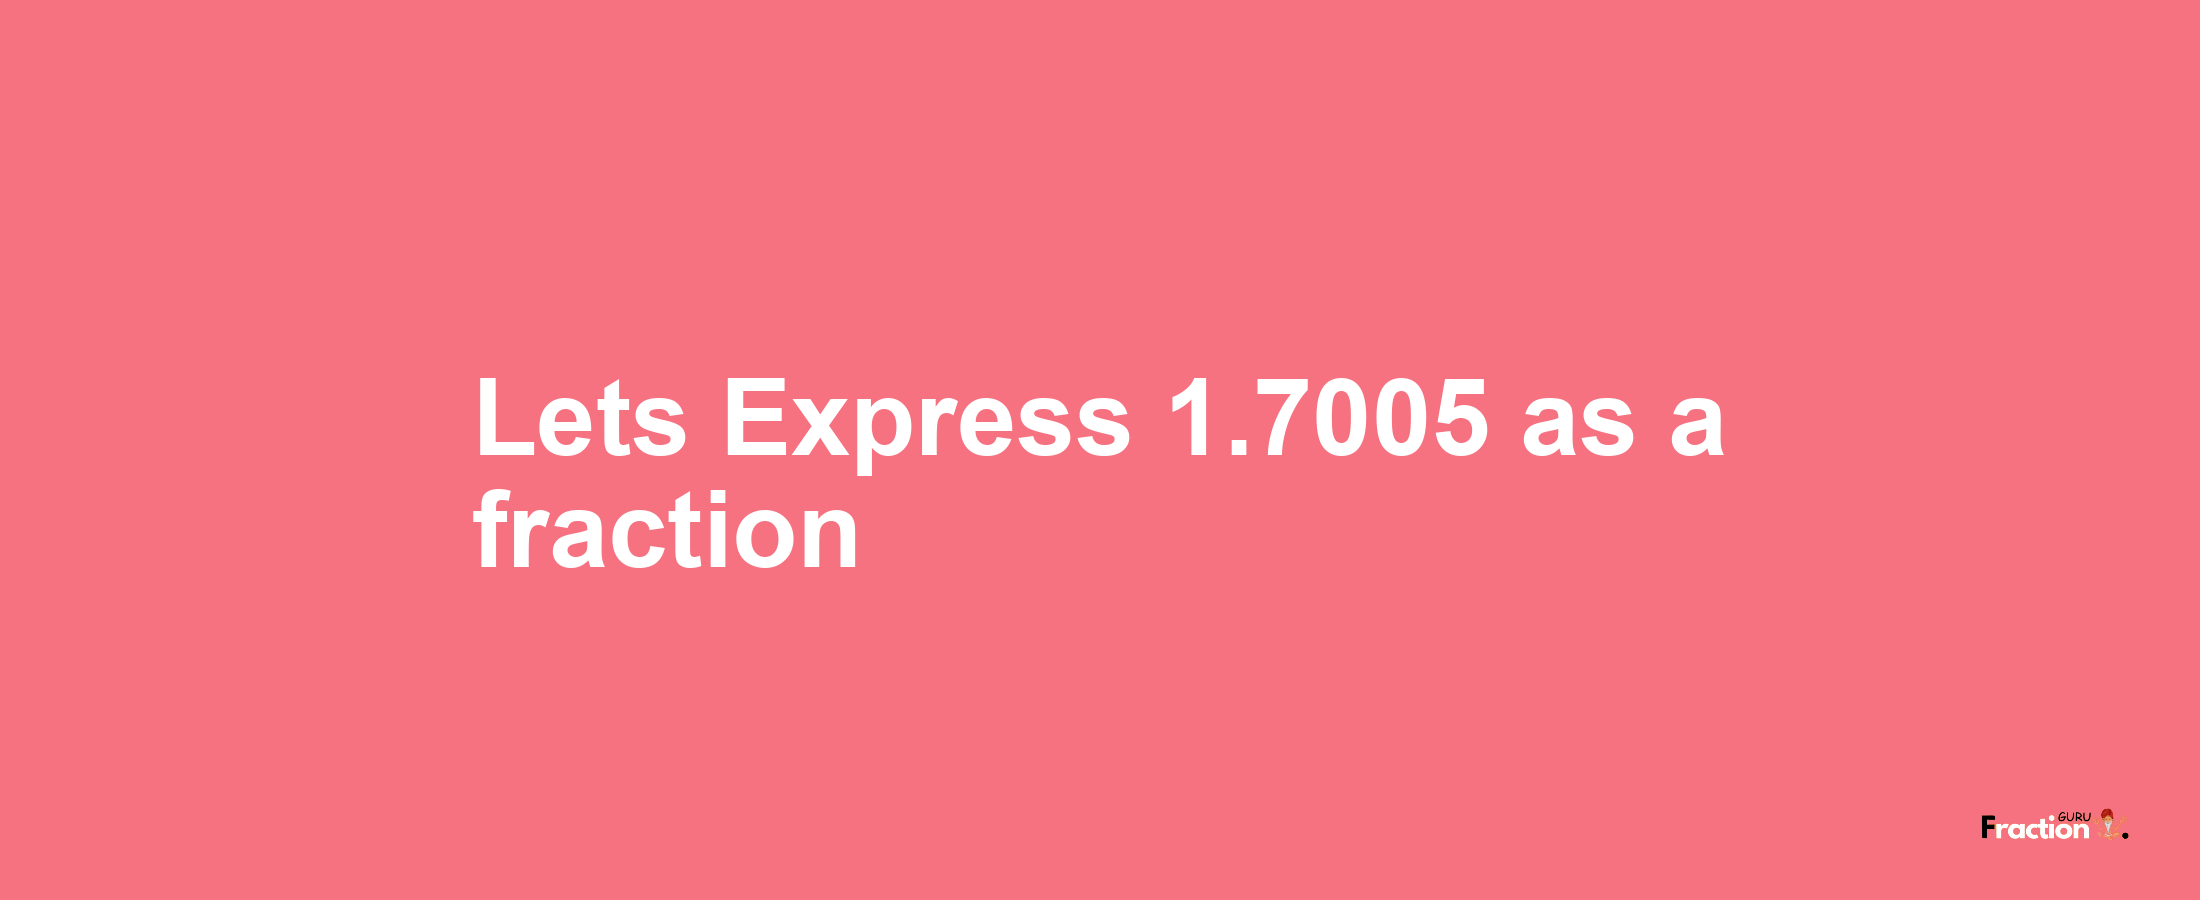 Lets Express 1.7005 as afraction